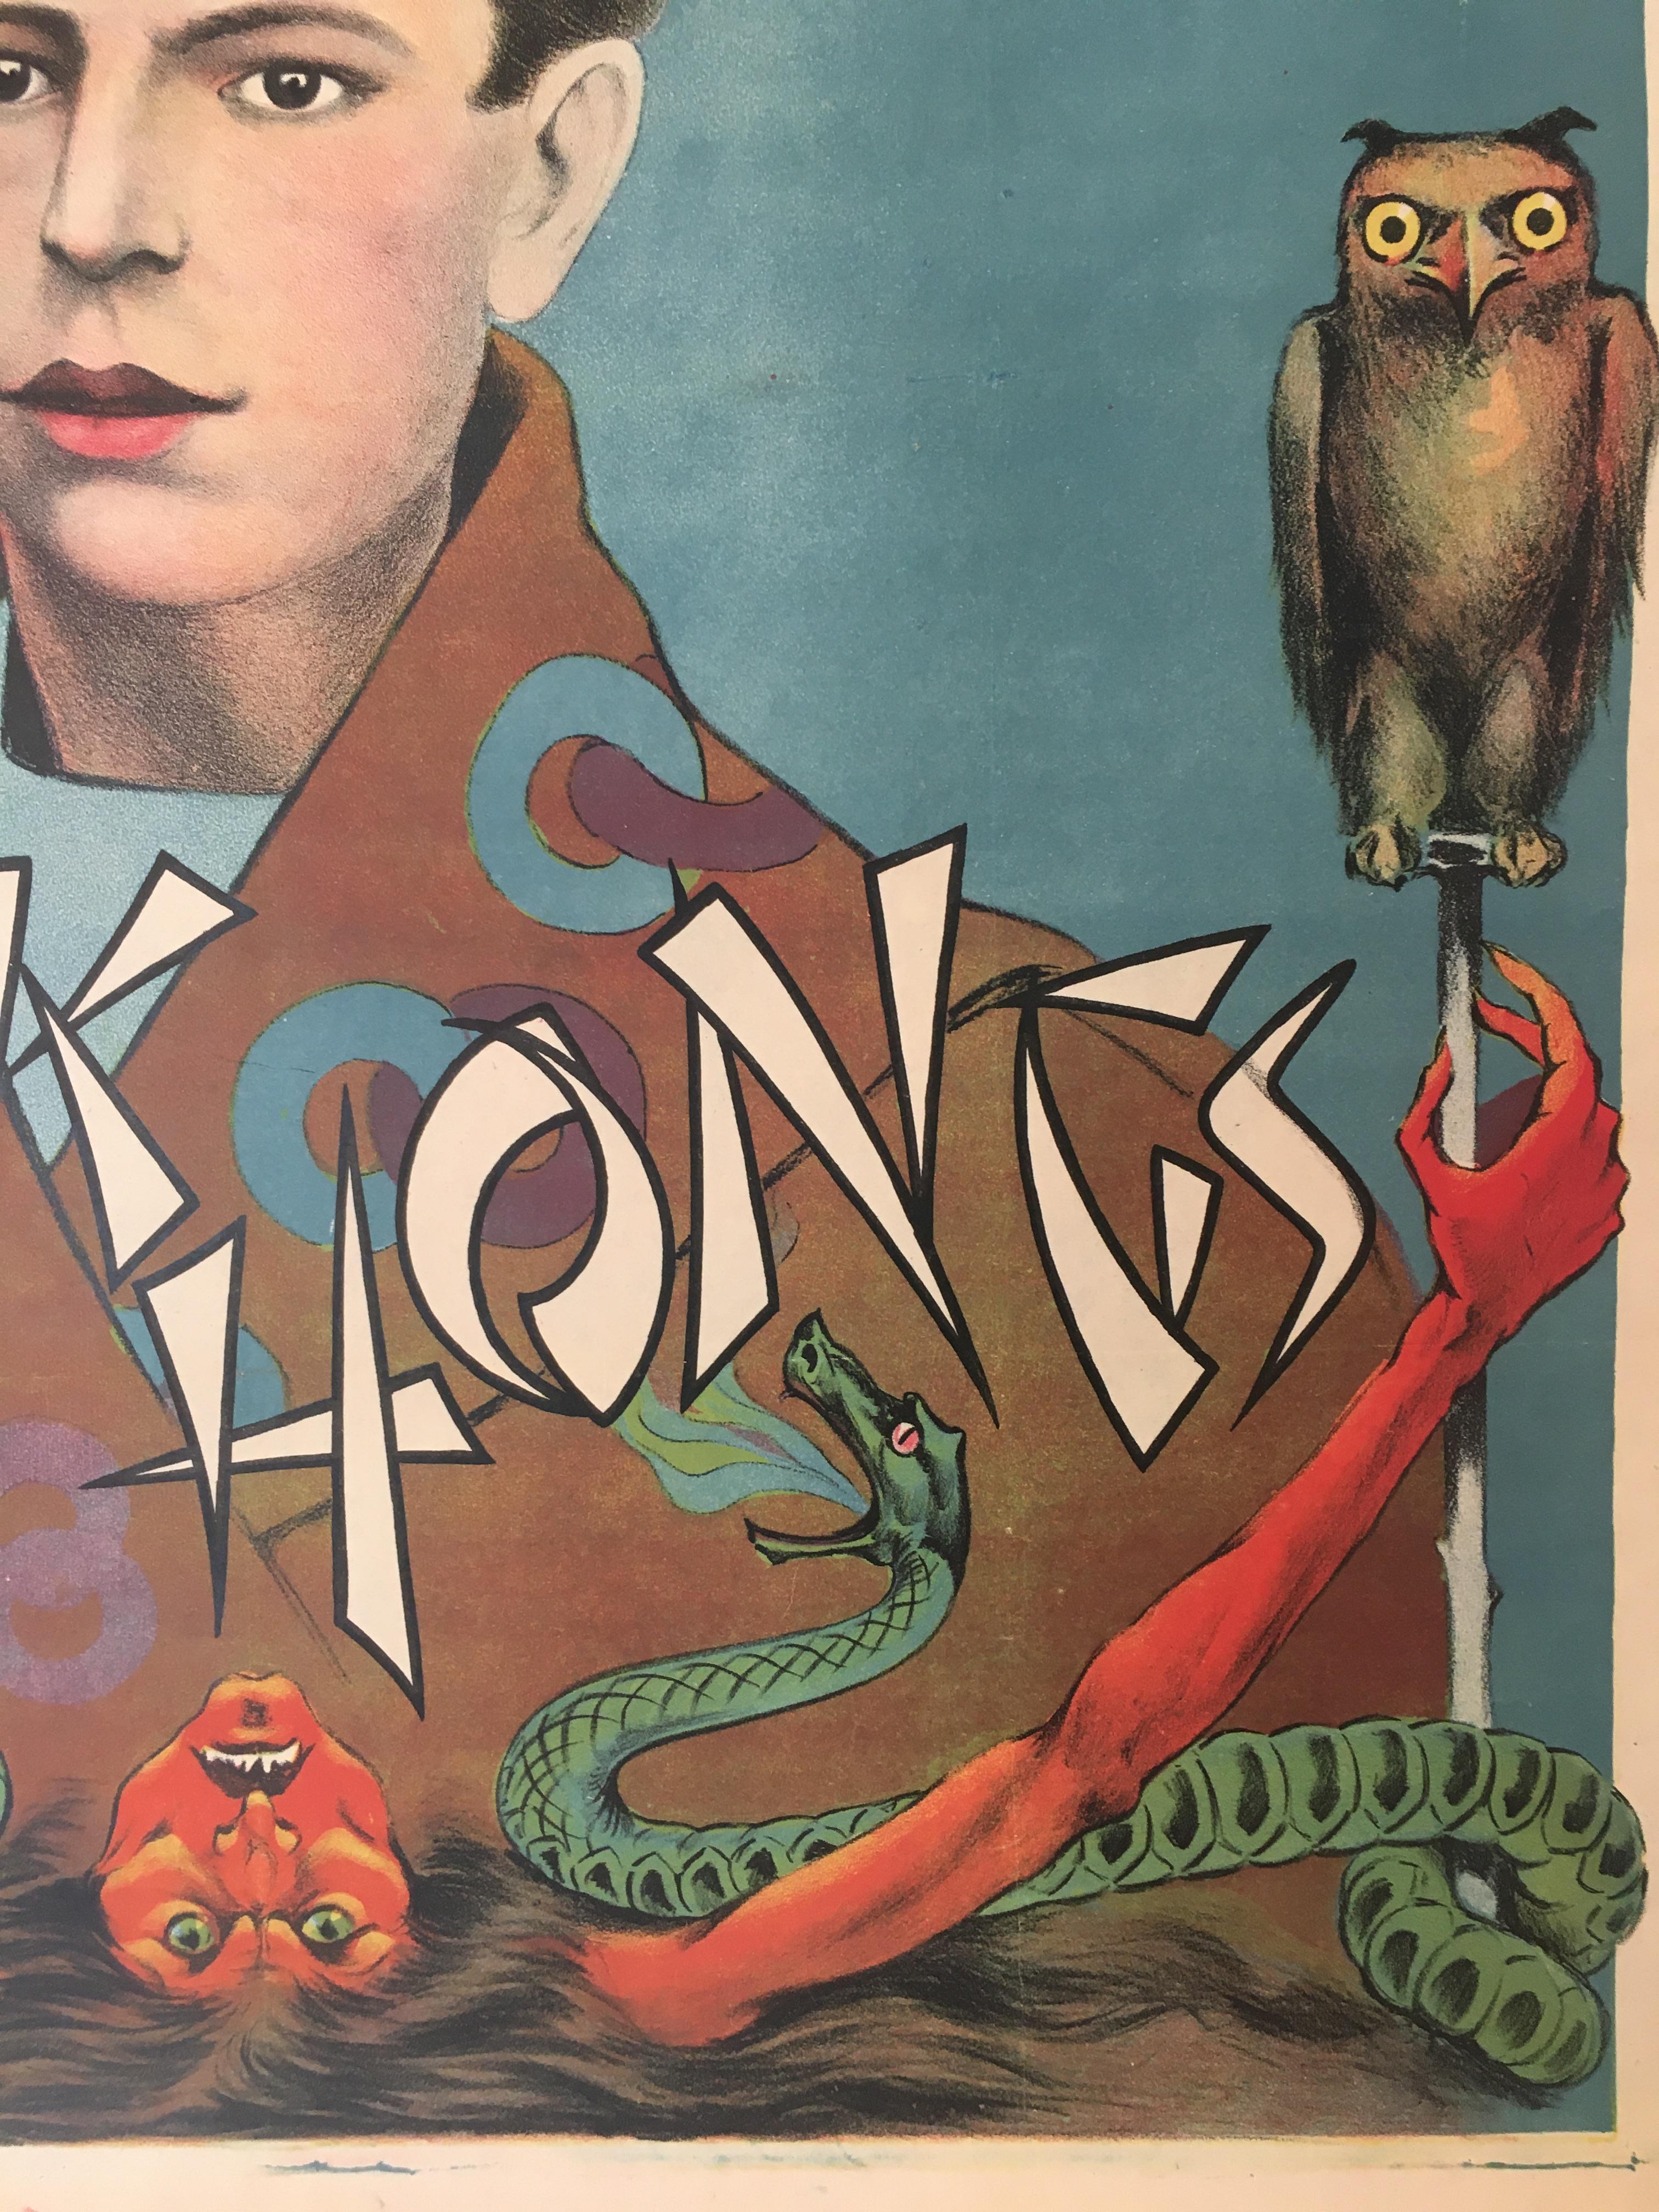 Early 20th Century 'The Fak Hong' Original Vintage French Theatre and Cabaret Poster, circa 1920